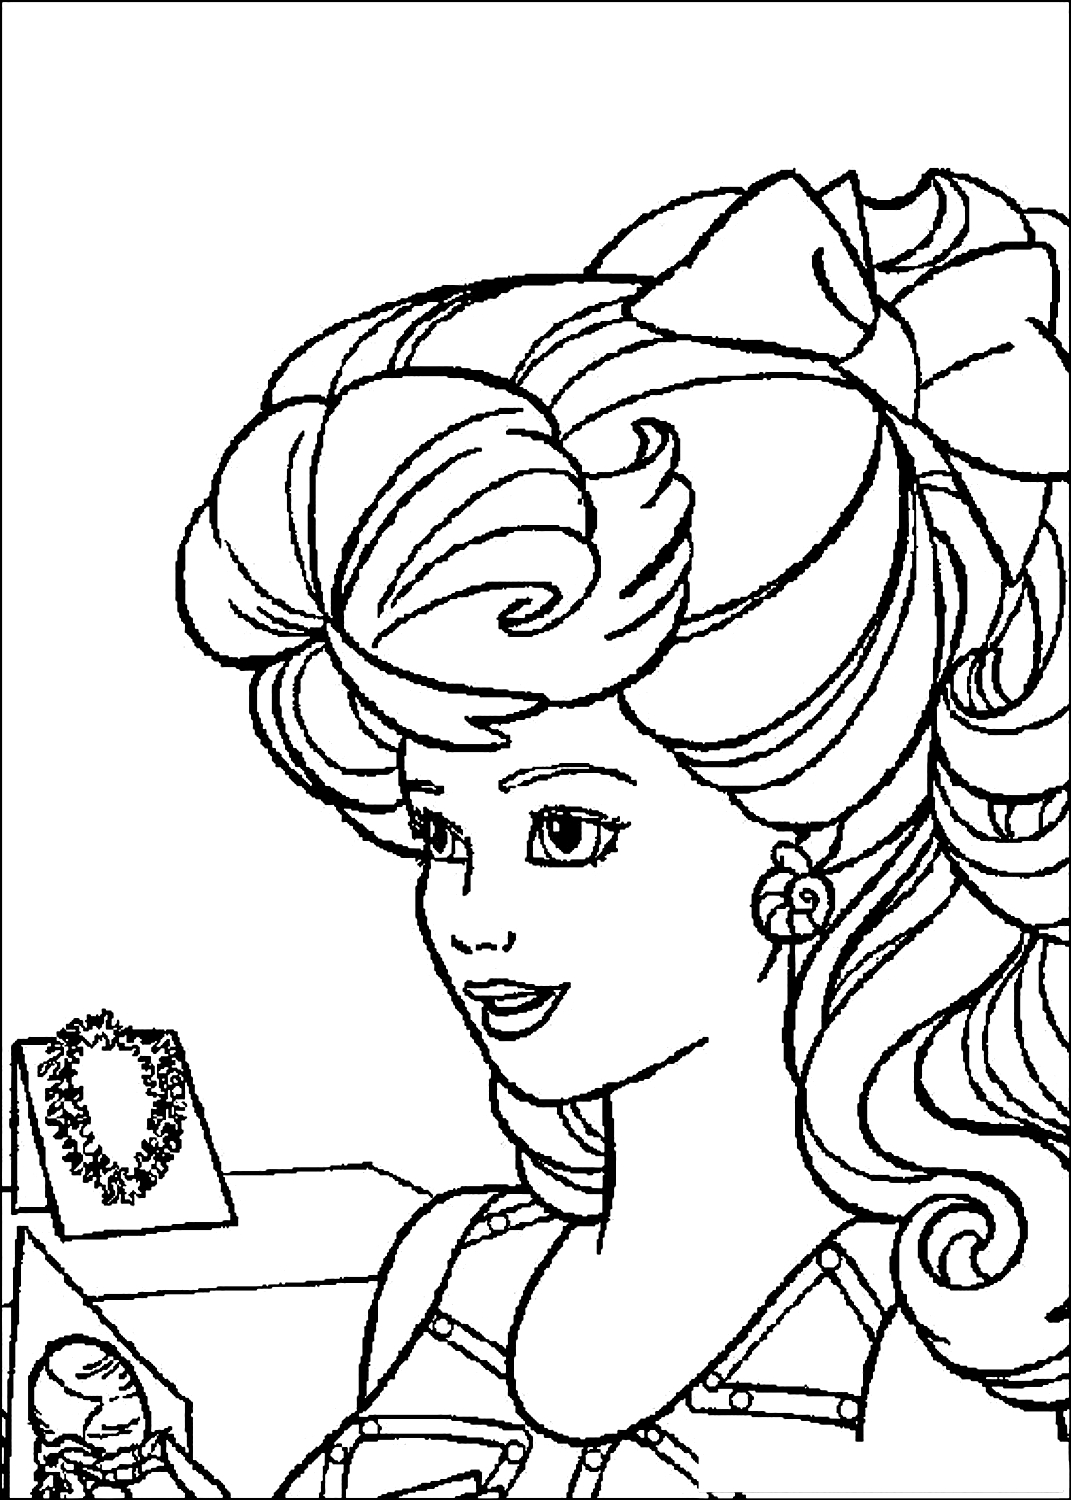 Barbie 20 Barbie coloring page to print and coloring